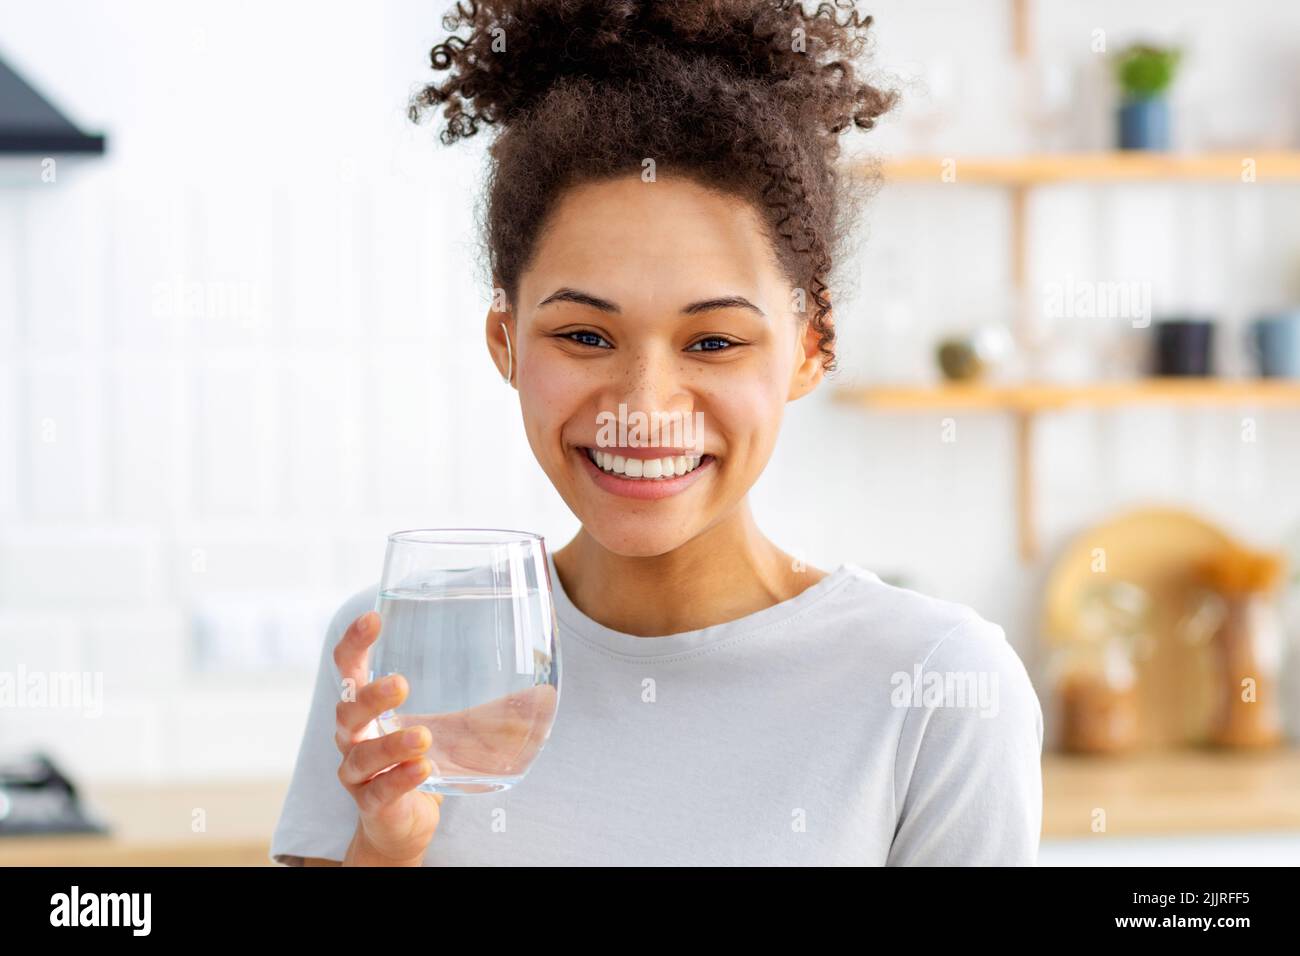 Healthy lifestyle concept. Beautiful young woman holding a glass of clean fresh water Stock Photo